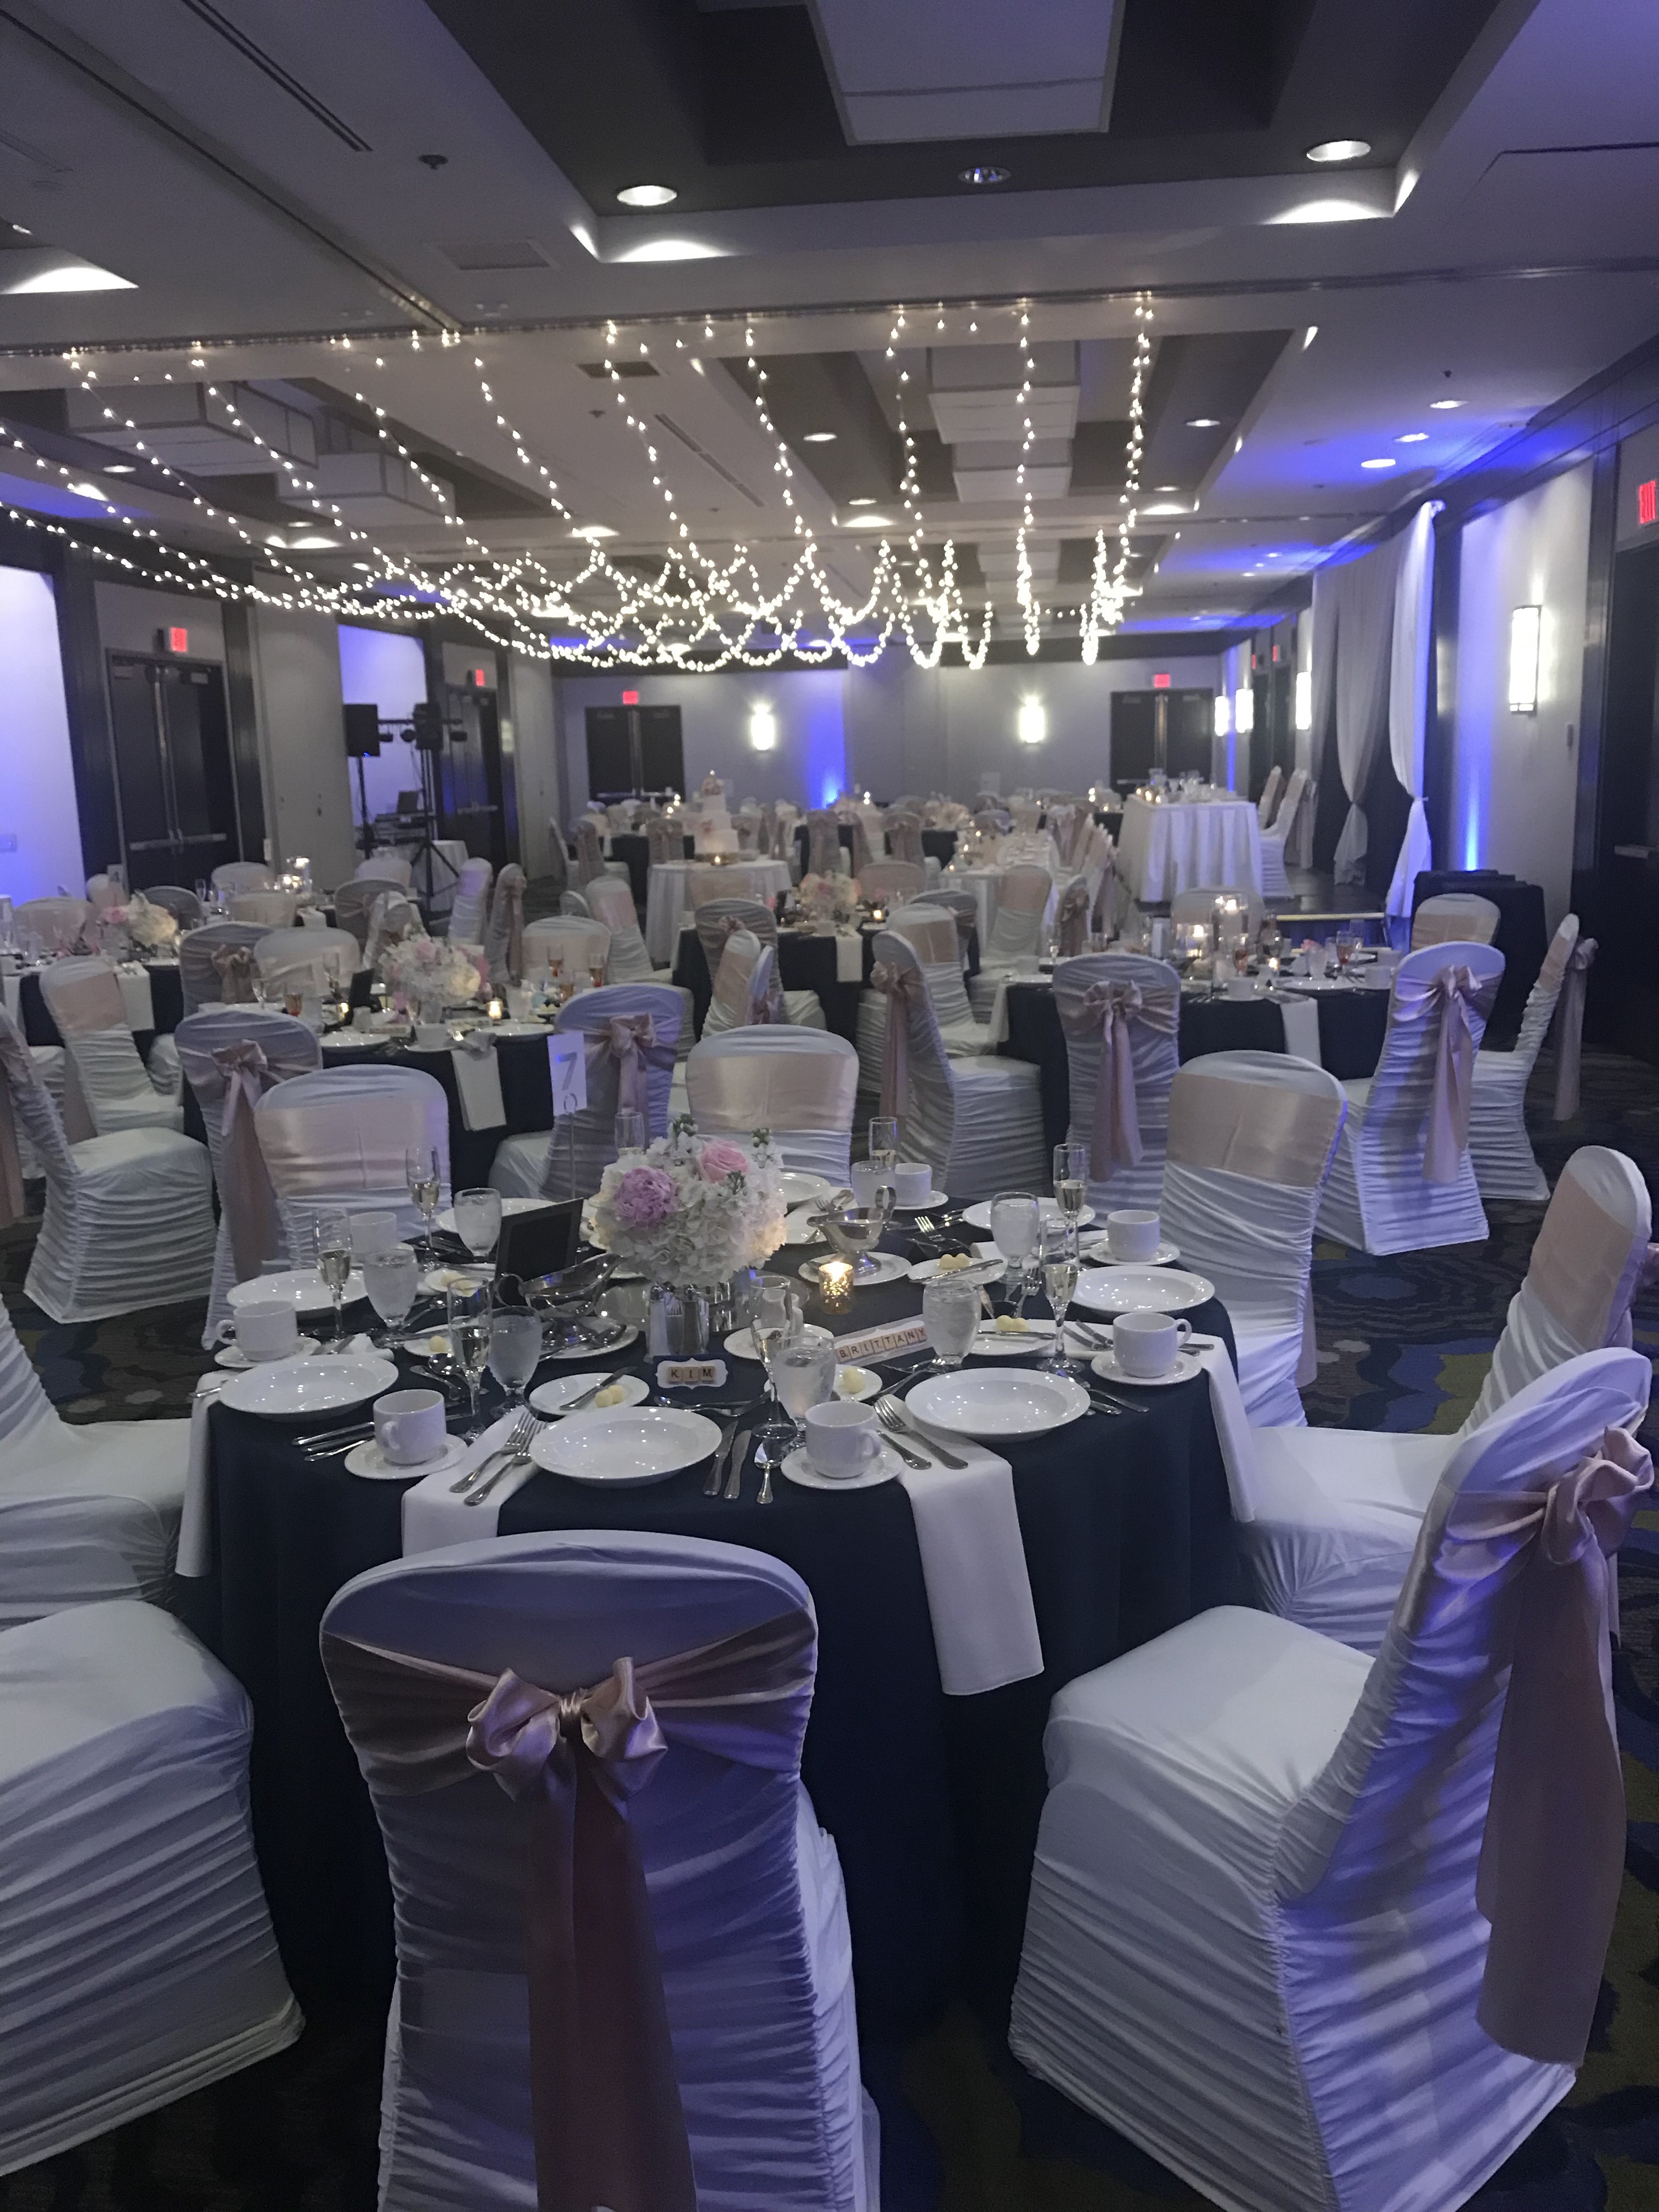 Wedding Venue Event Space with Stringed Lights